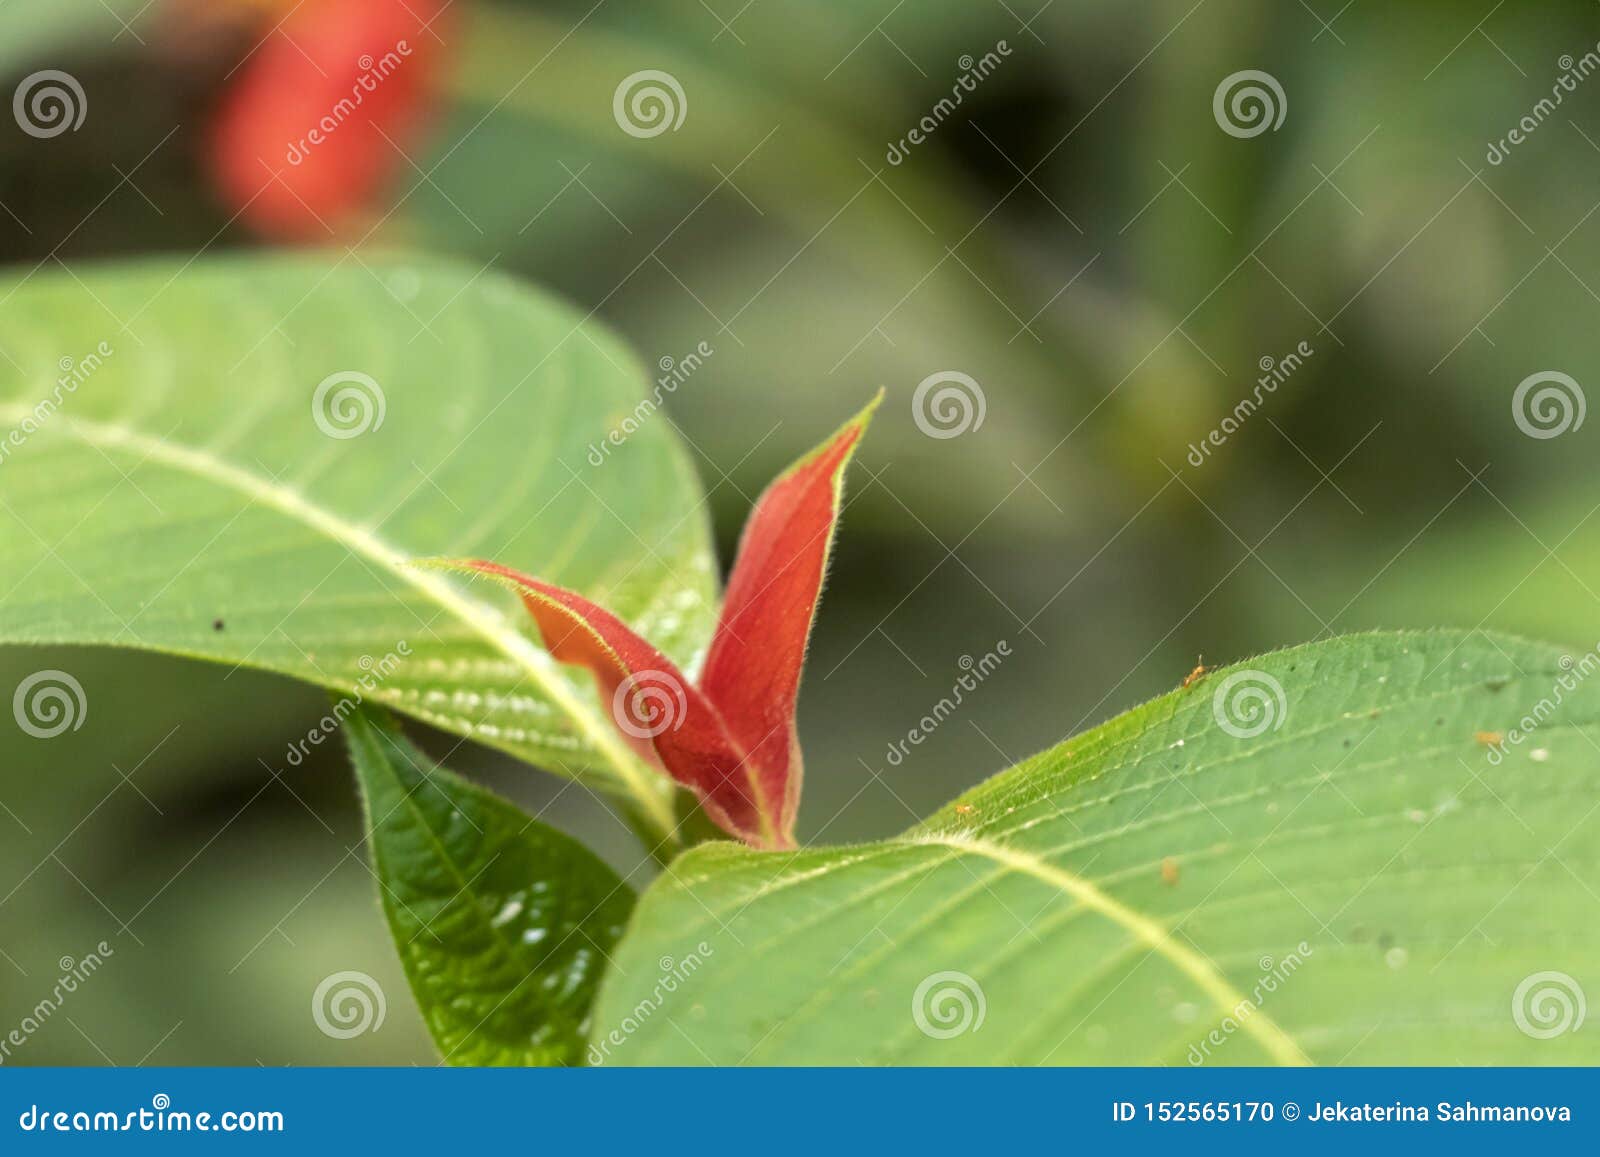 blurred nature background with red tropical flower : hot lips flower, psychotria poeppigiana